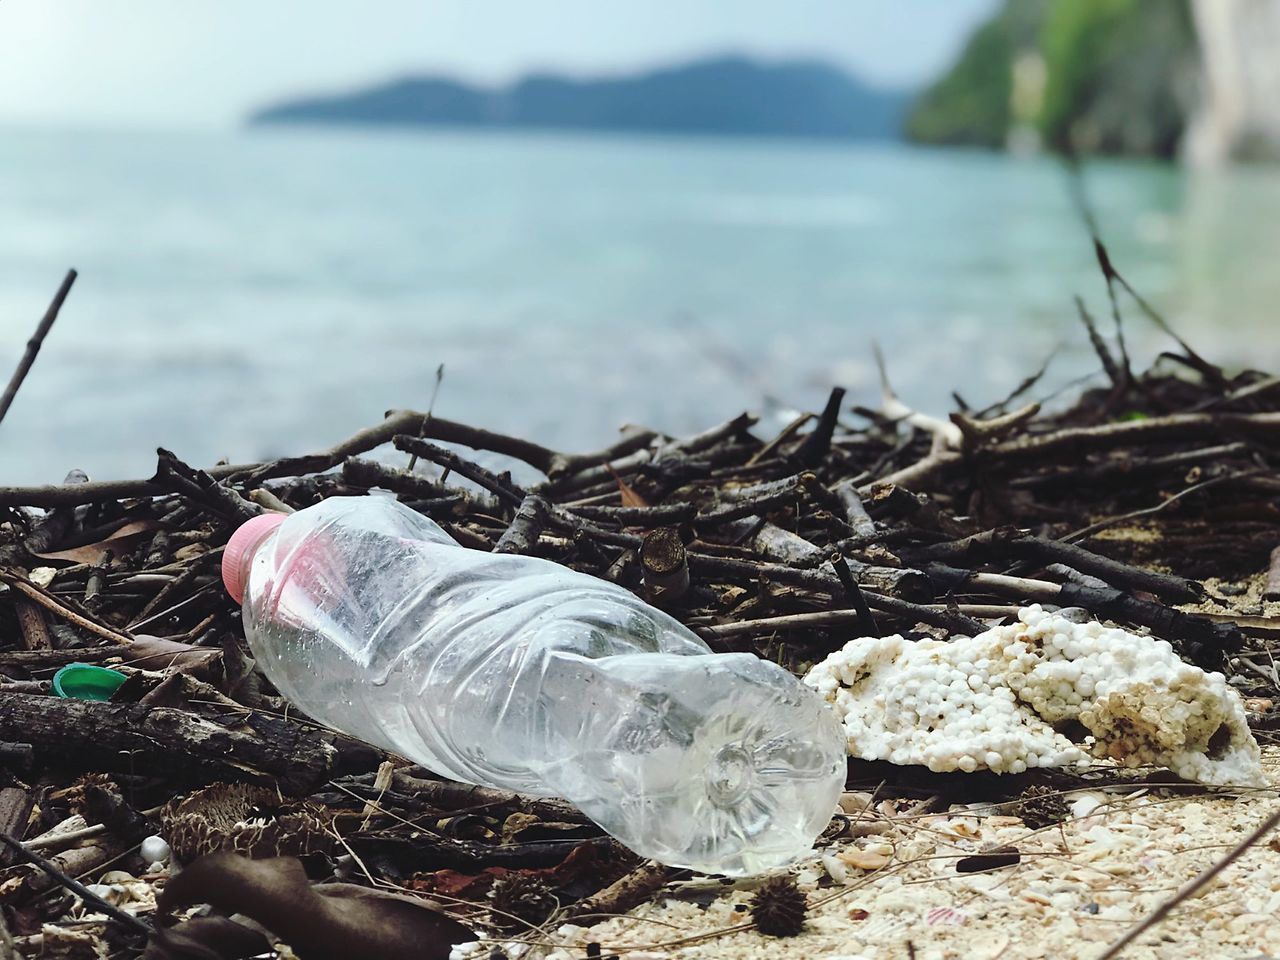 Discarded plastic bottle on the beach